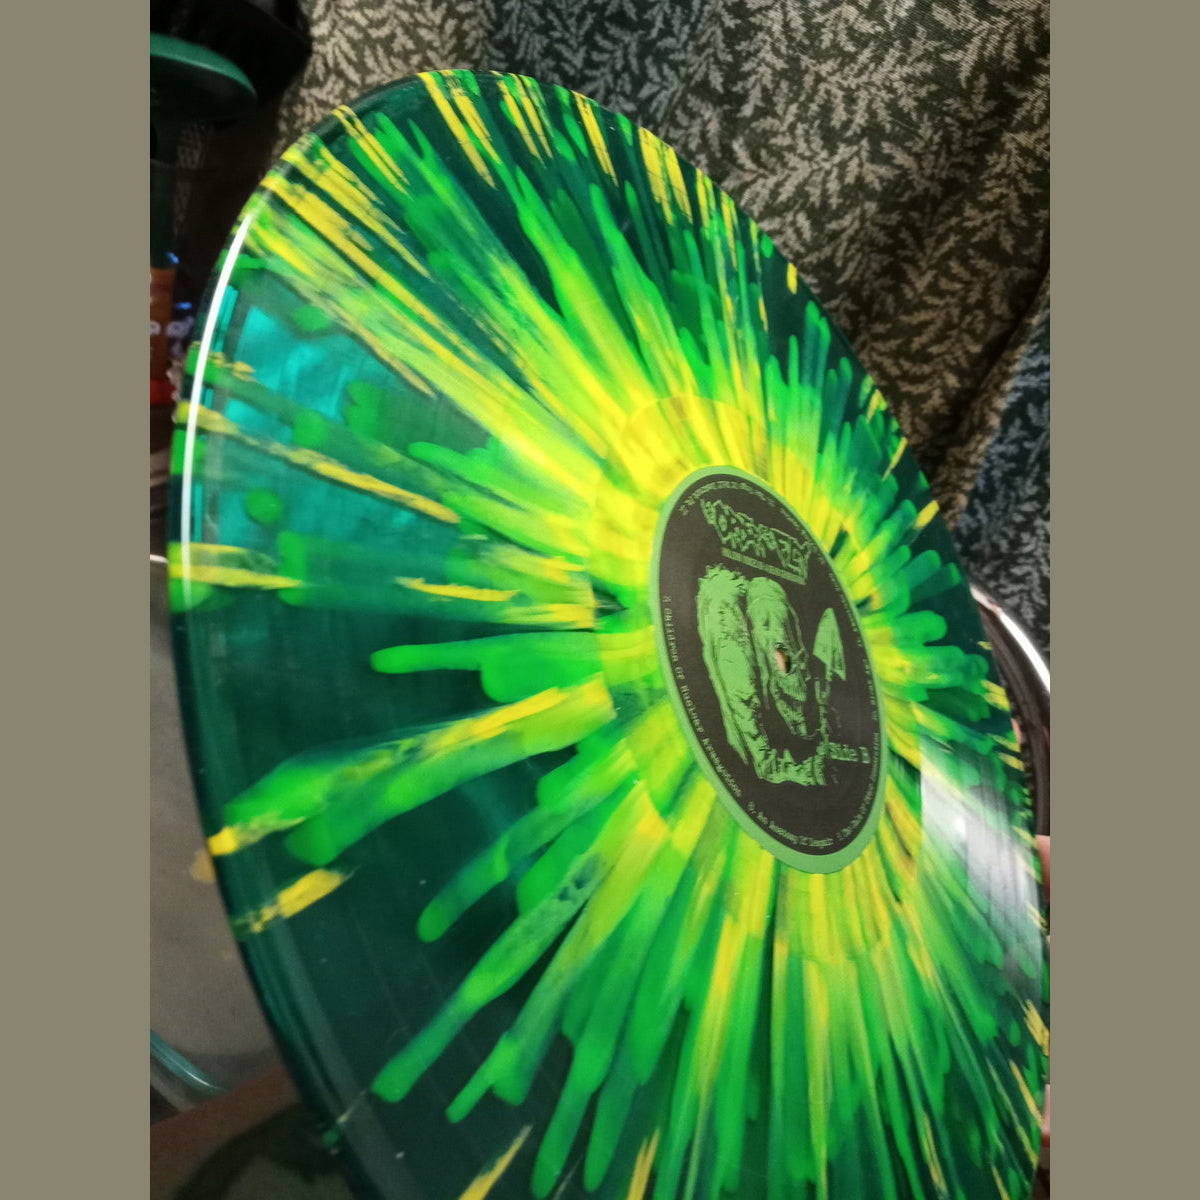 Order Of The Fly- Hollow Voices Of A Dead Generation LP ~GATEFOLD COVER + RARE CLEAR BLOWFLY GREEN WAX WITH BILE YELLOW SPLATTERS LTD TO 100 COPIES!